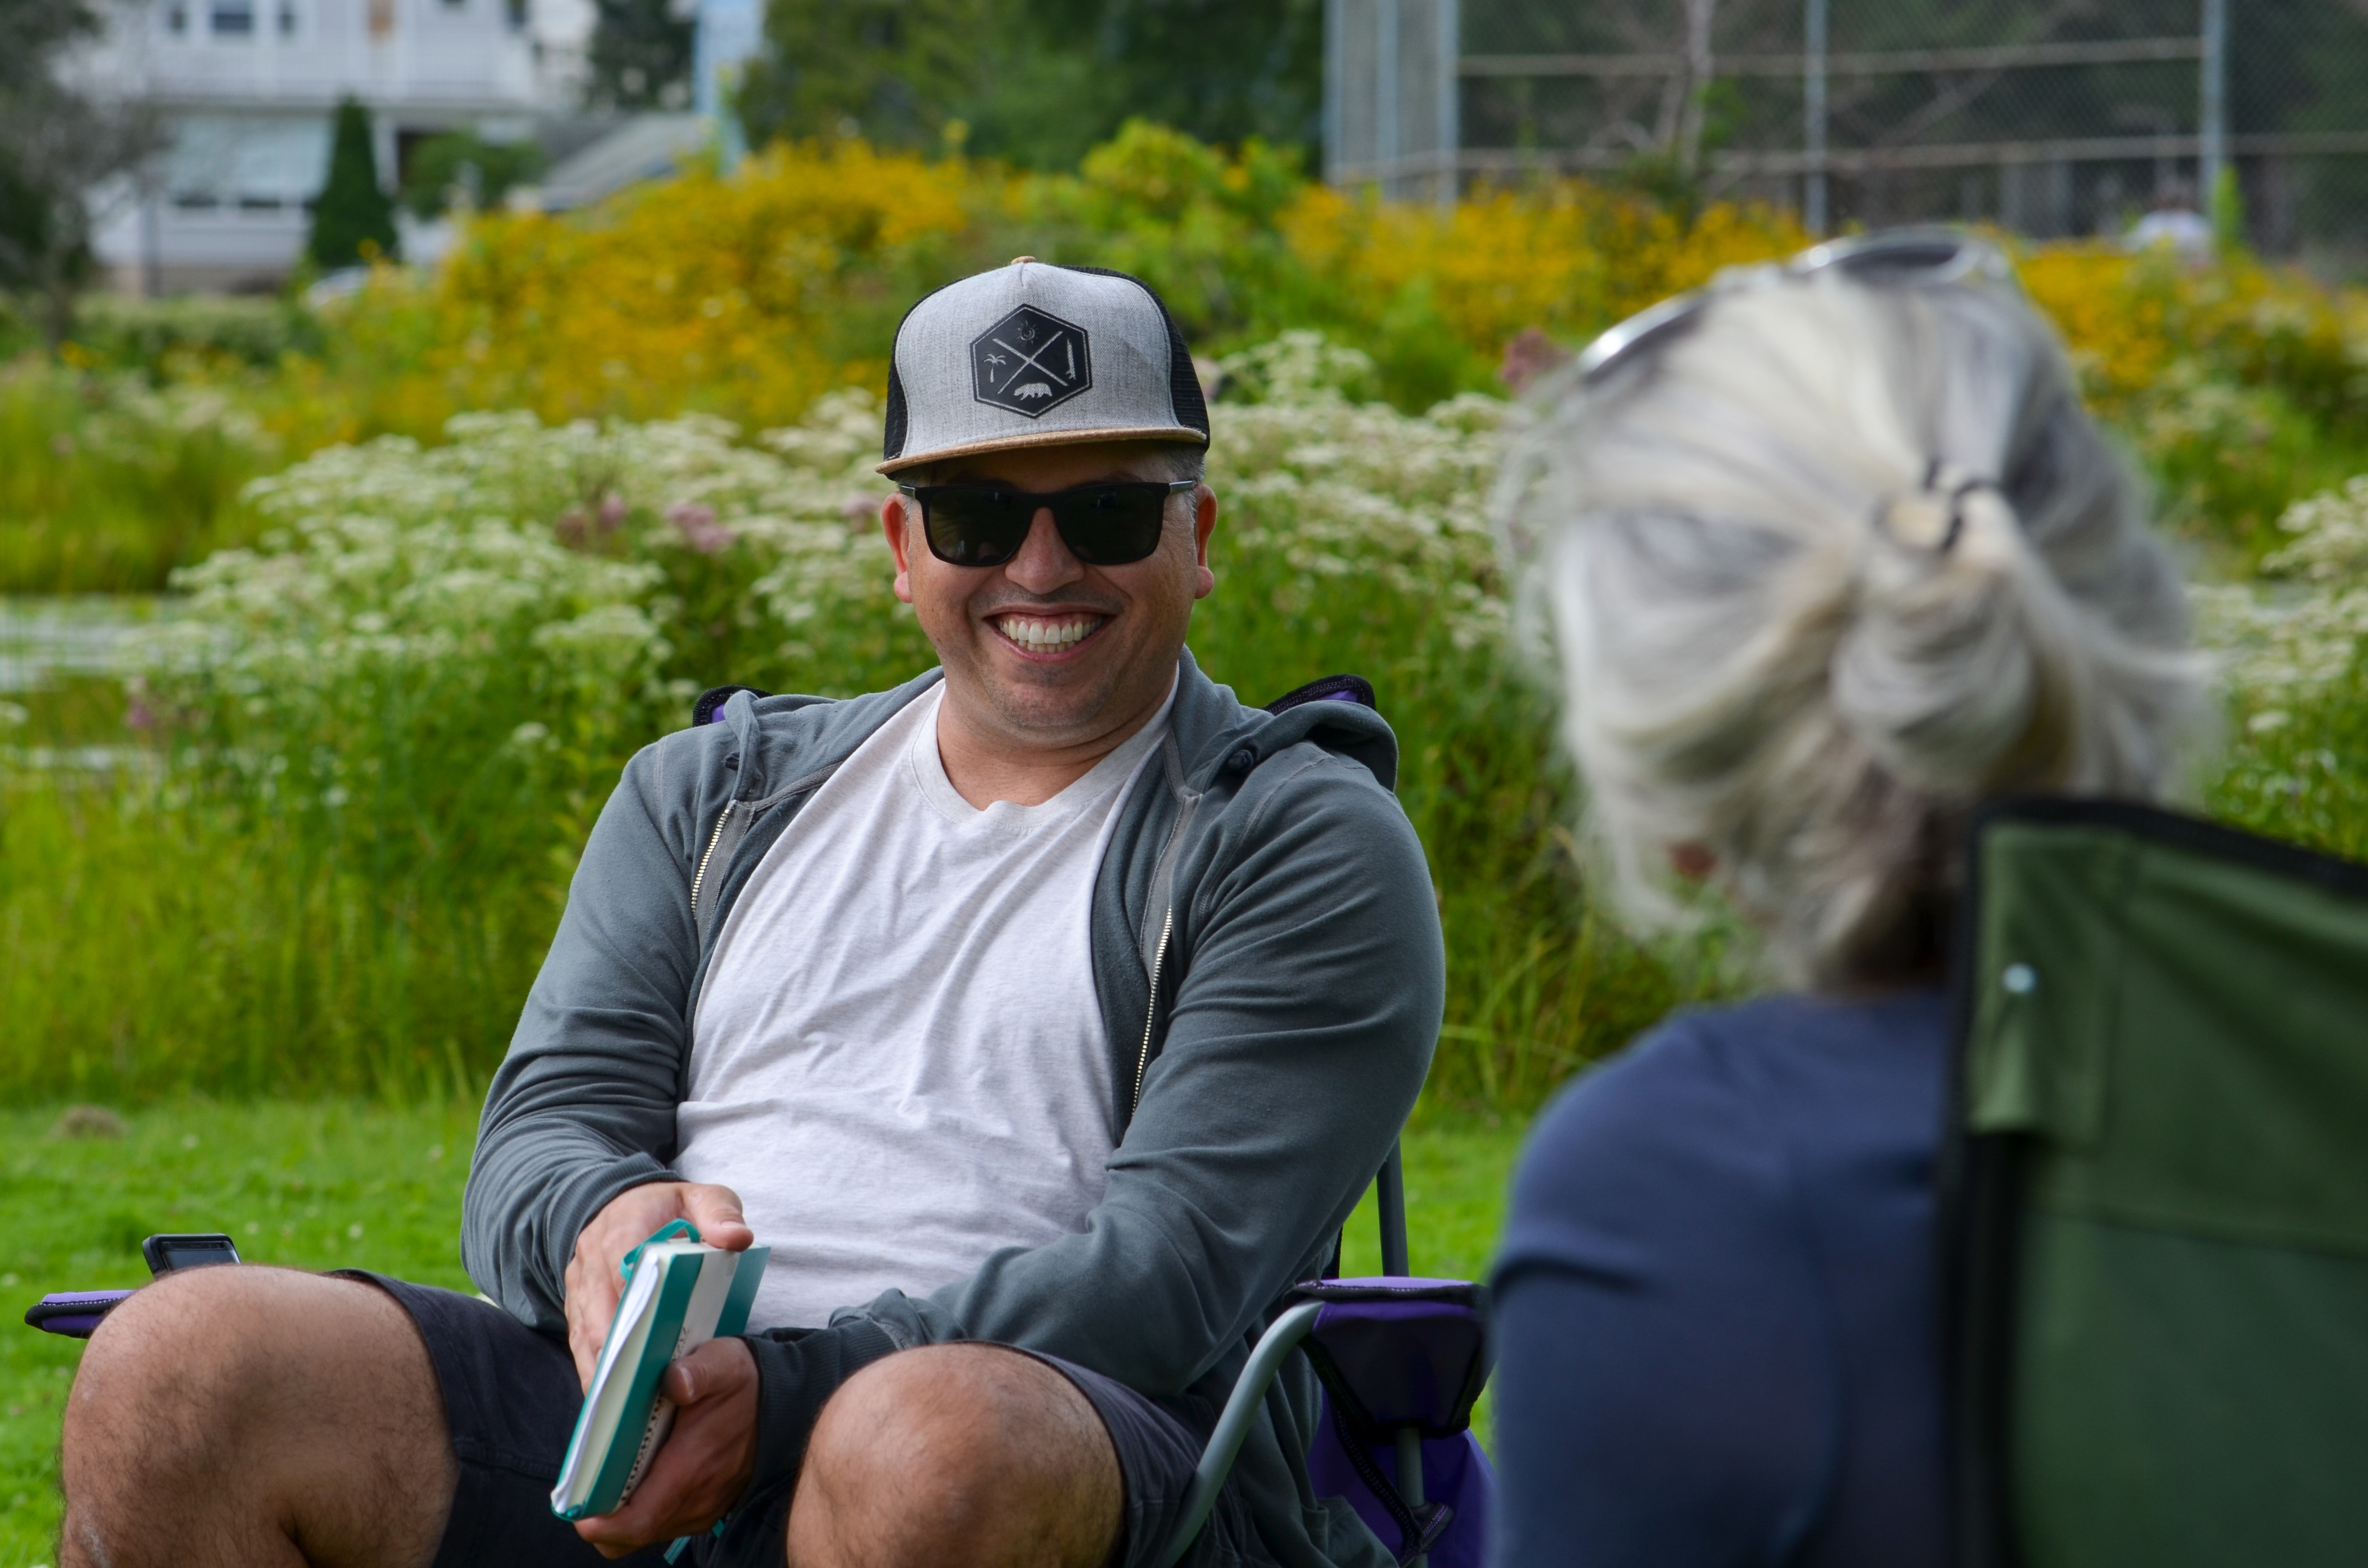 A man in a baseball cap and dark sunglasses sits in a park while smiling at a person in the foreground